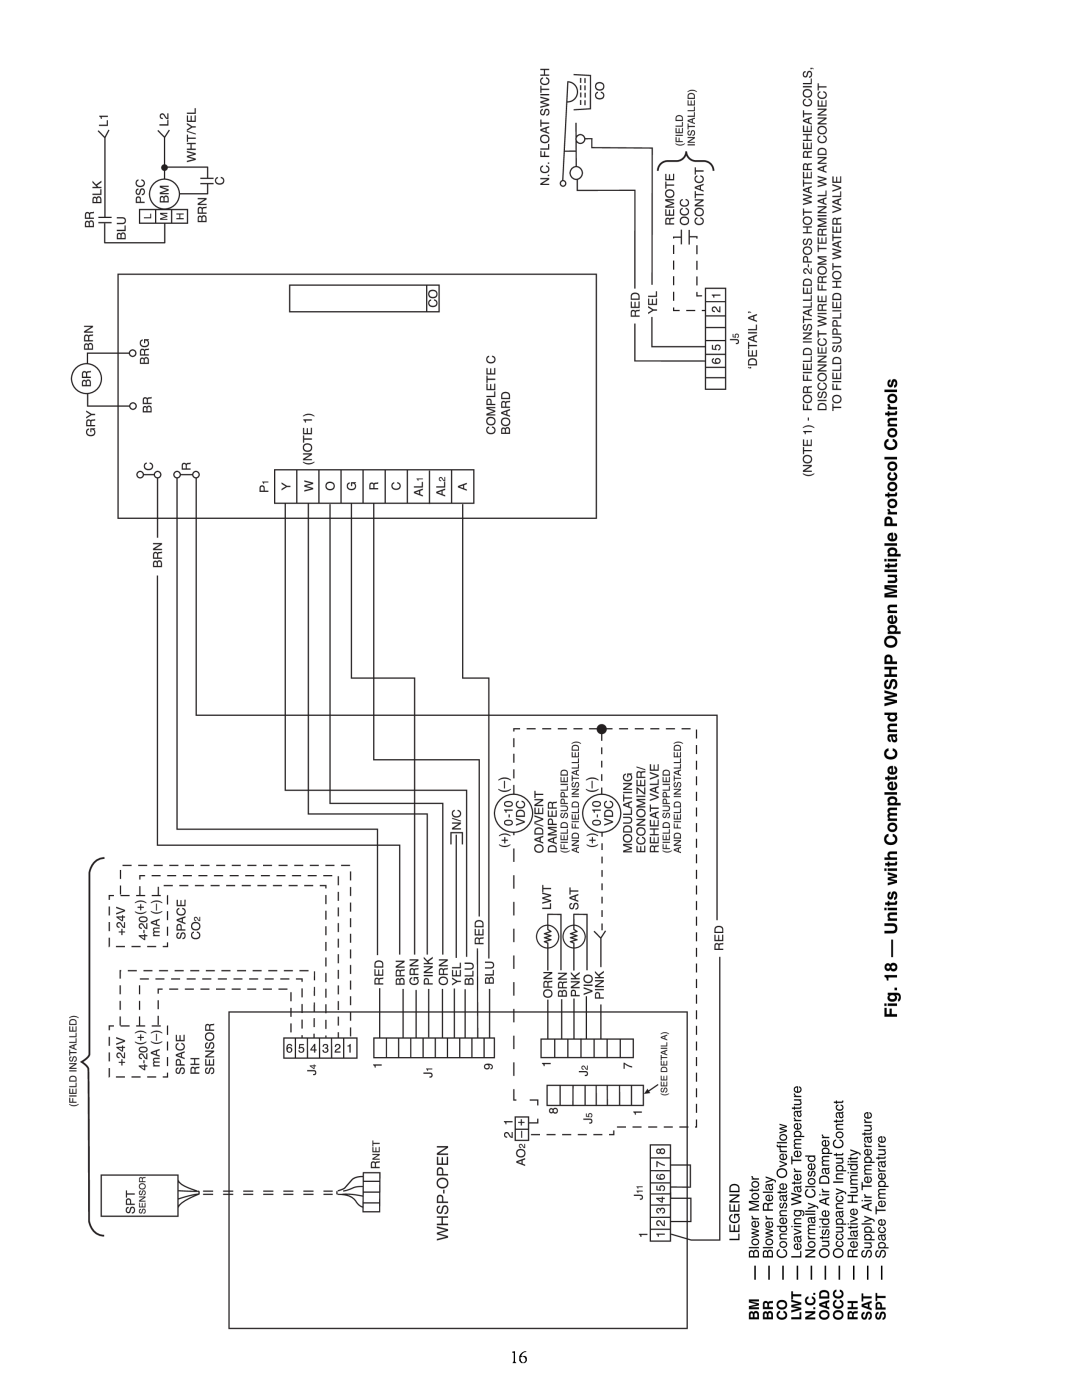 Carrier PCV015-060 specifications A50-8355, Whsp-Open, LEGEND BM - Blower Motor BR - Blower Relay, CO - Condensate Overflow 